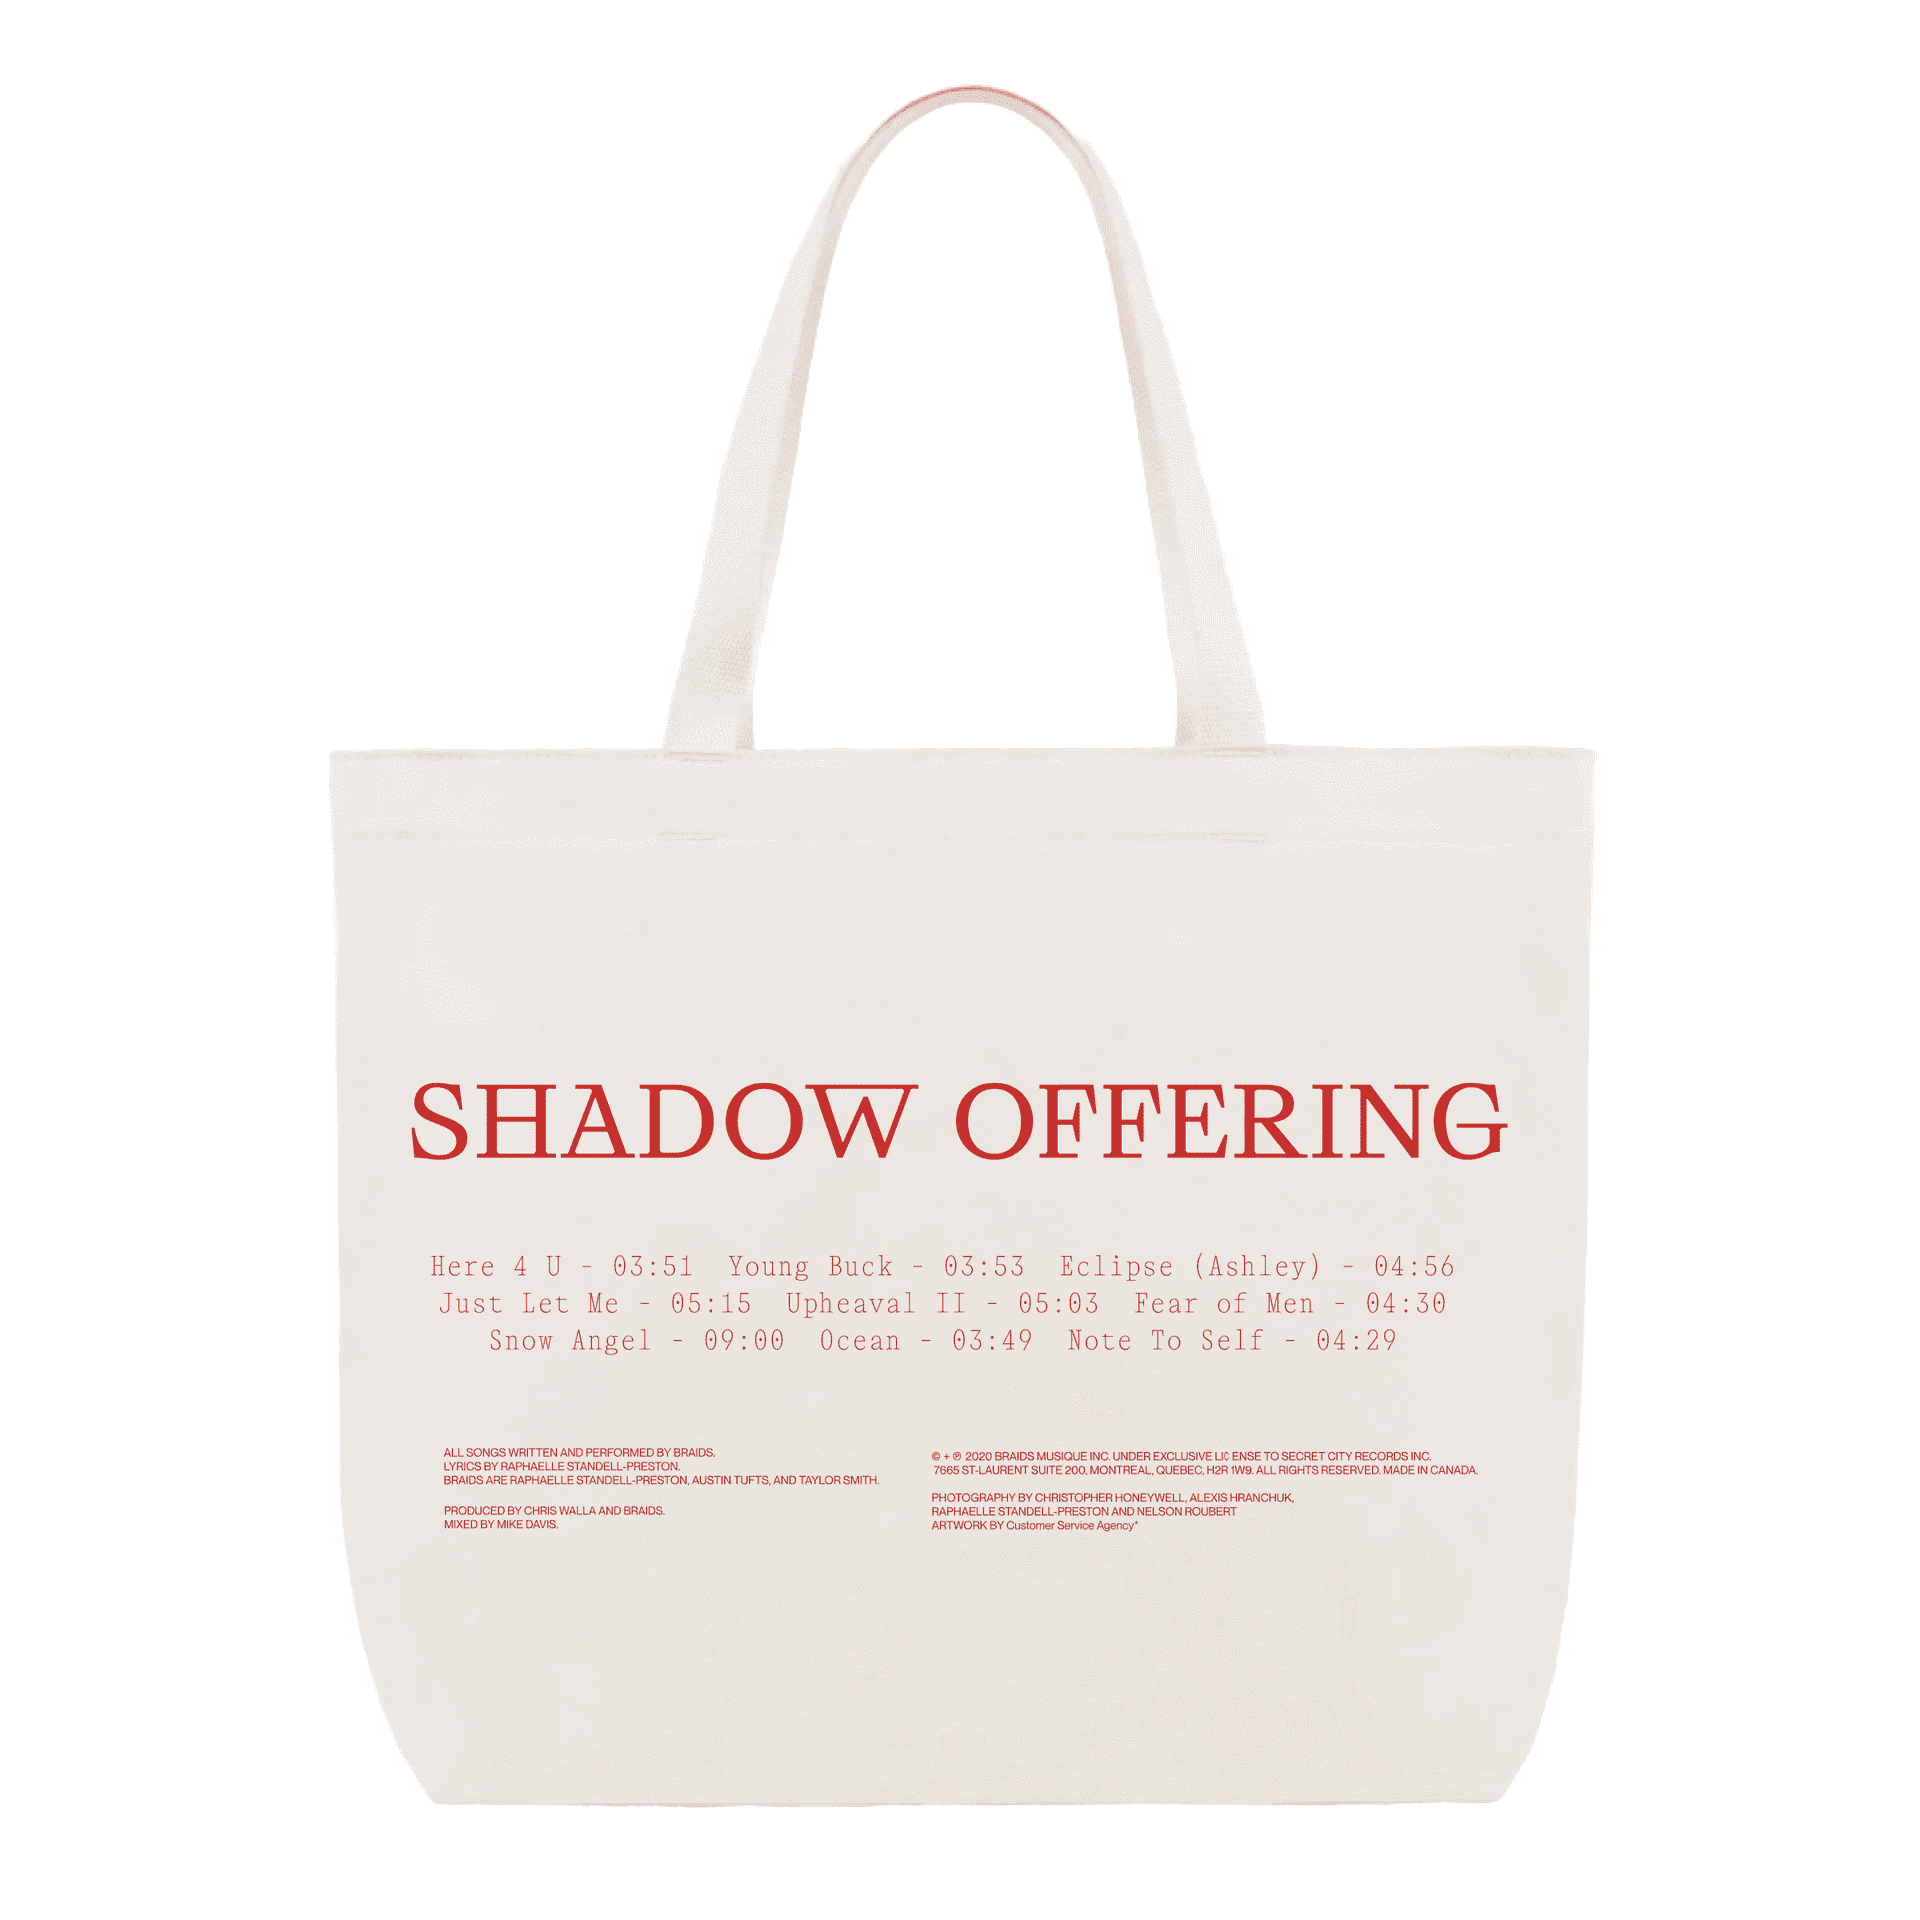 ‘SHADOW OFFERING’ TOTE BAG - image 2 of 3